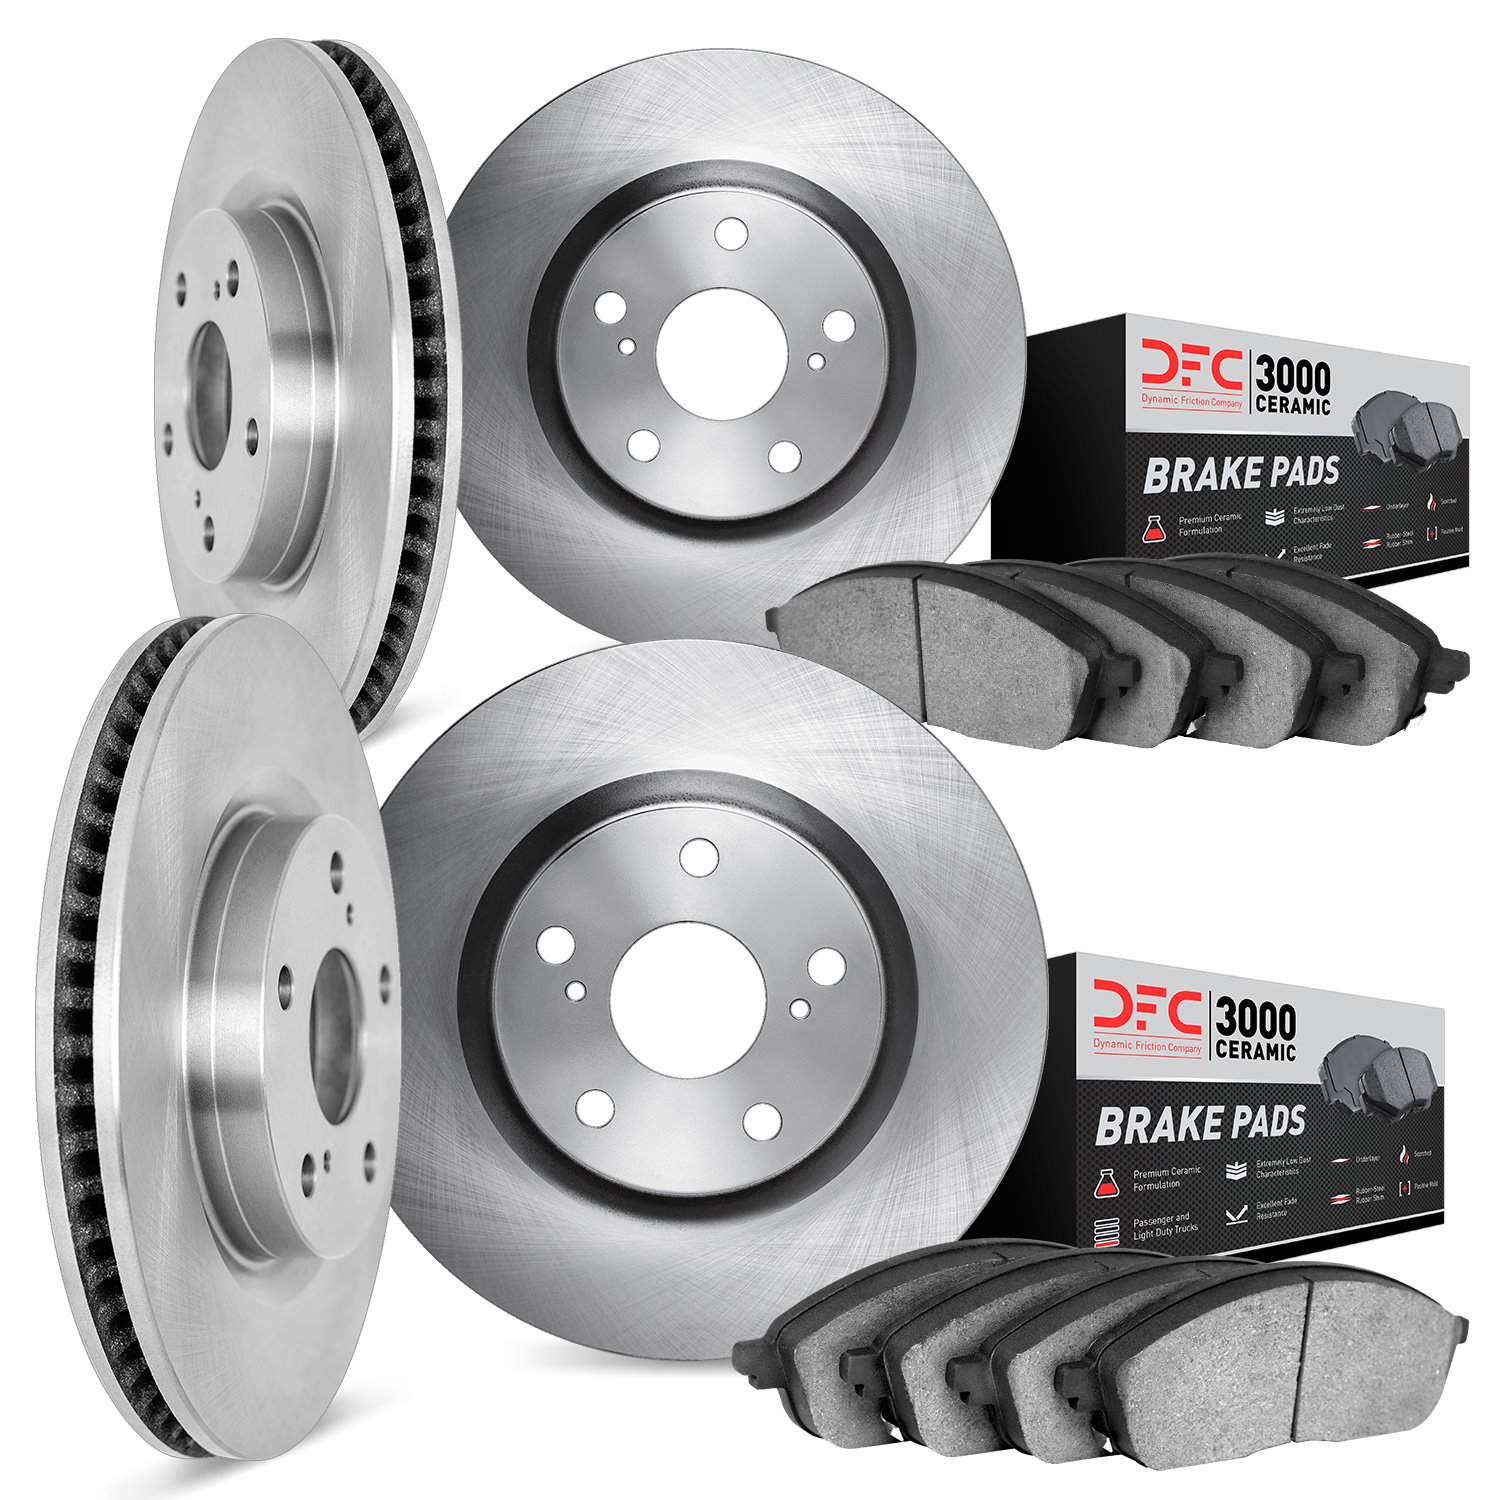 6304-02015 Brake Rotors with 3000-Series Ceramic Brake Pads Kit, 1994-1998 Porsche, Position: Front and Rear